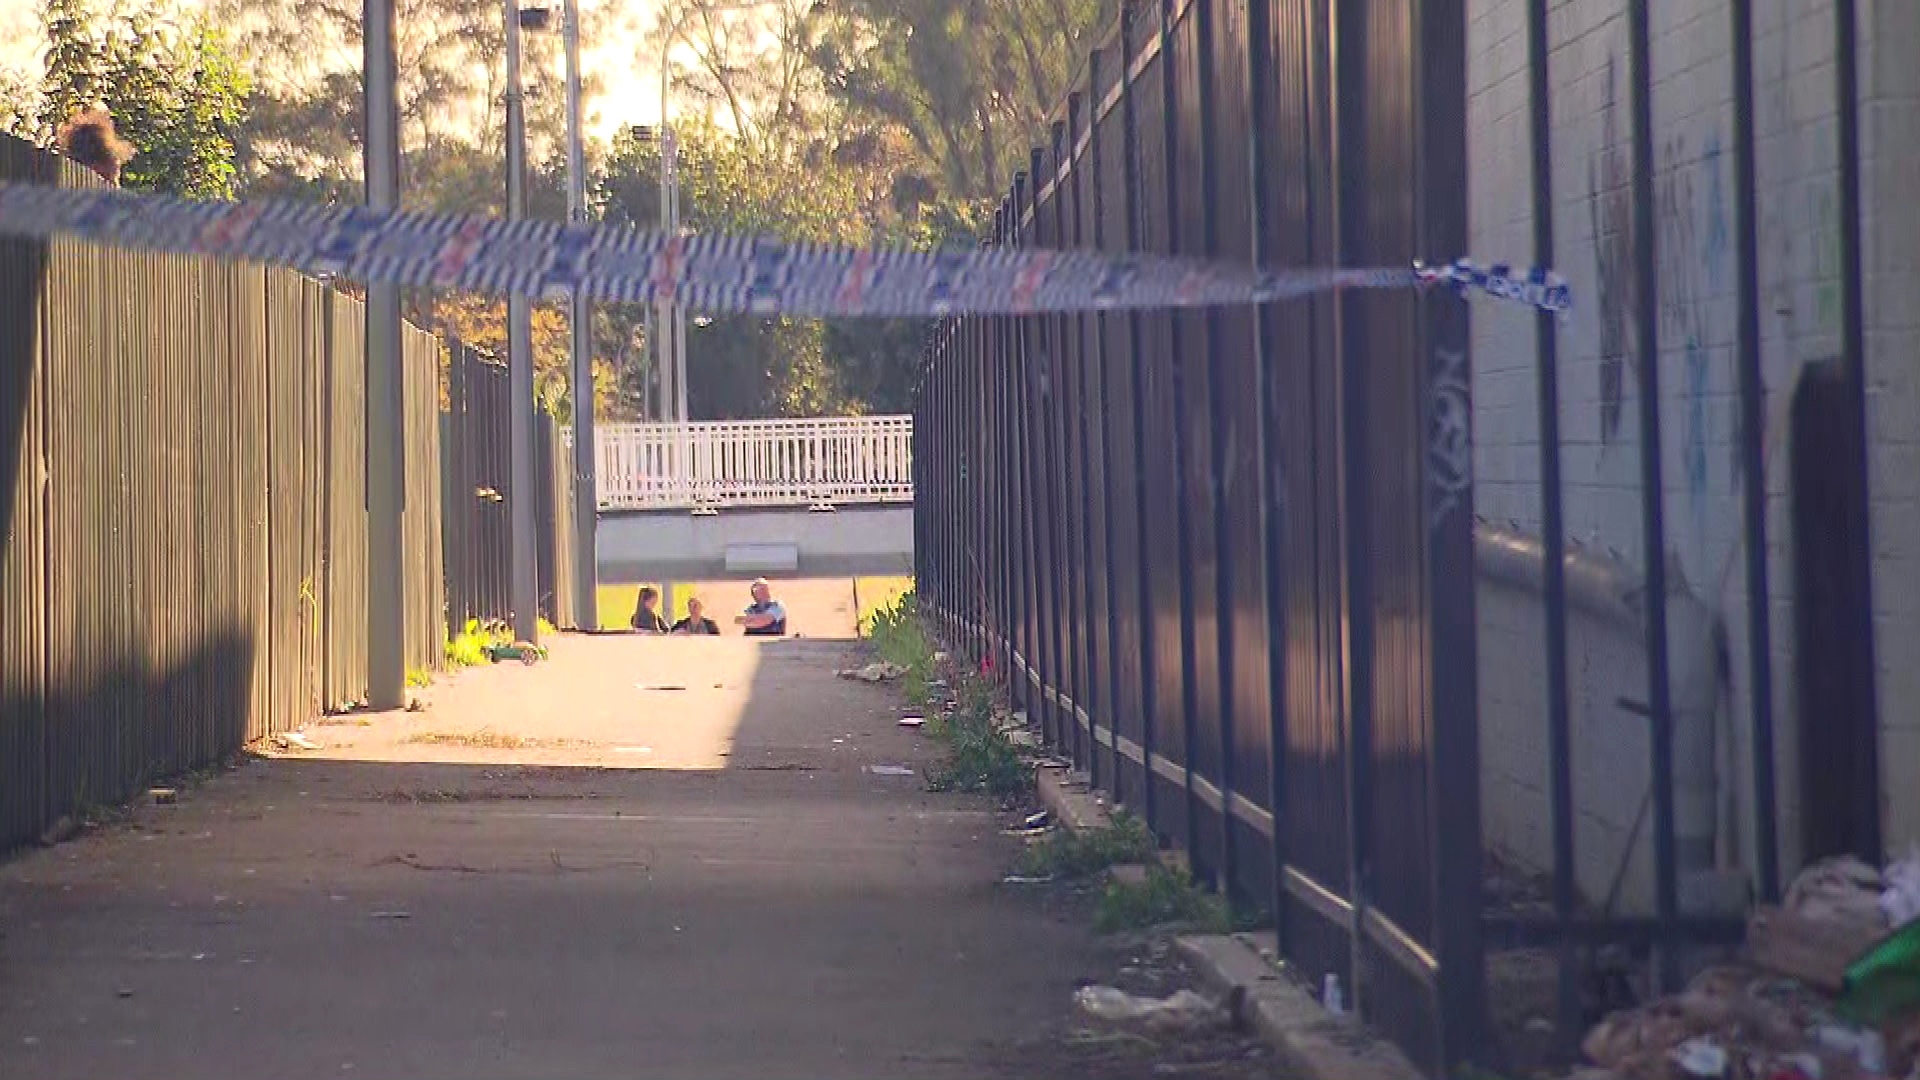 Police are searching for three men after a suspected shooting in Sydney's west.A man in his 20s was found with serious injuries in Carlisle Avenue at Bidwell this afternoon before he was taken to Westmead Hospital for emergency surgery.
A crime scene spanning 300 metres was set up for forensic examination.